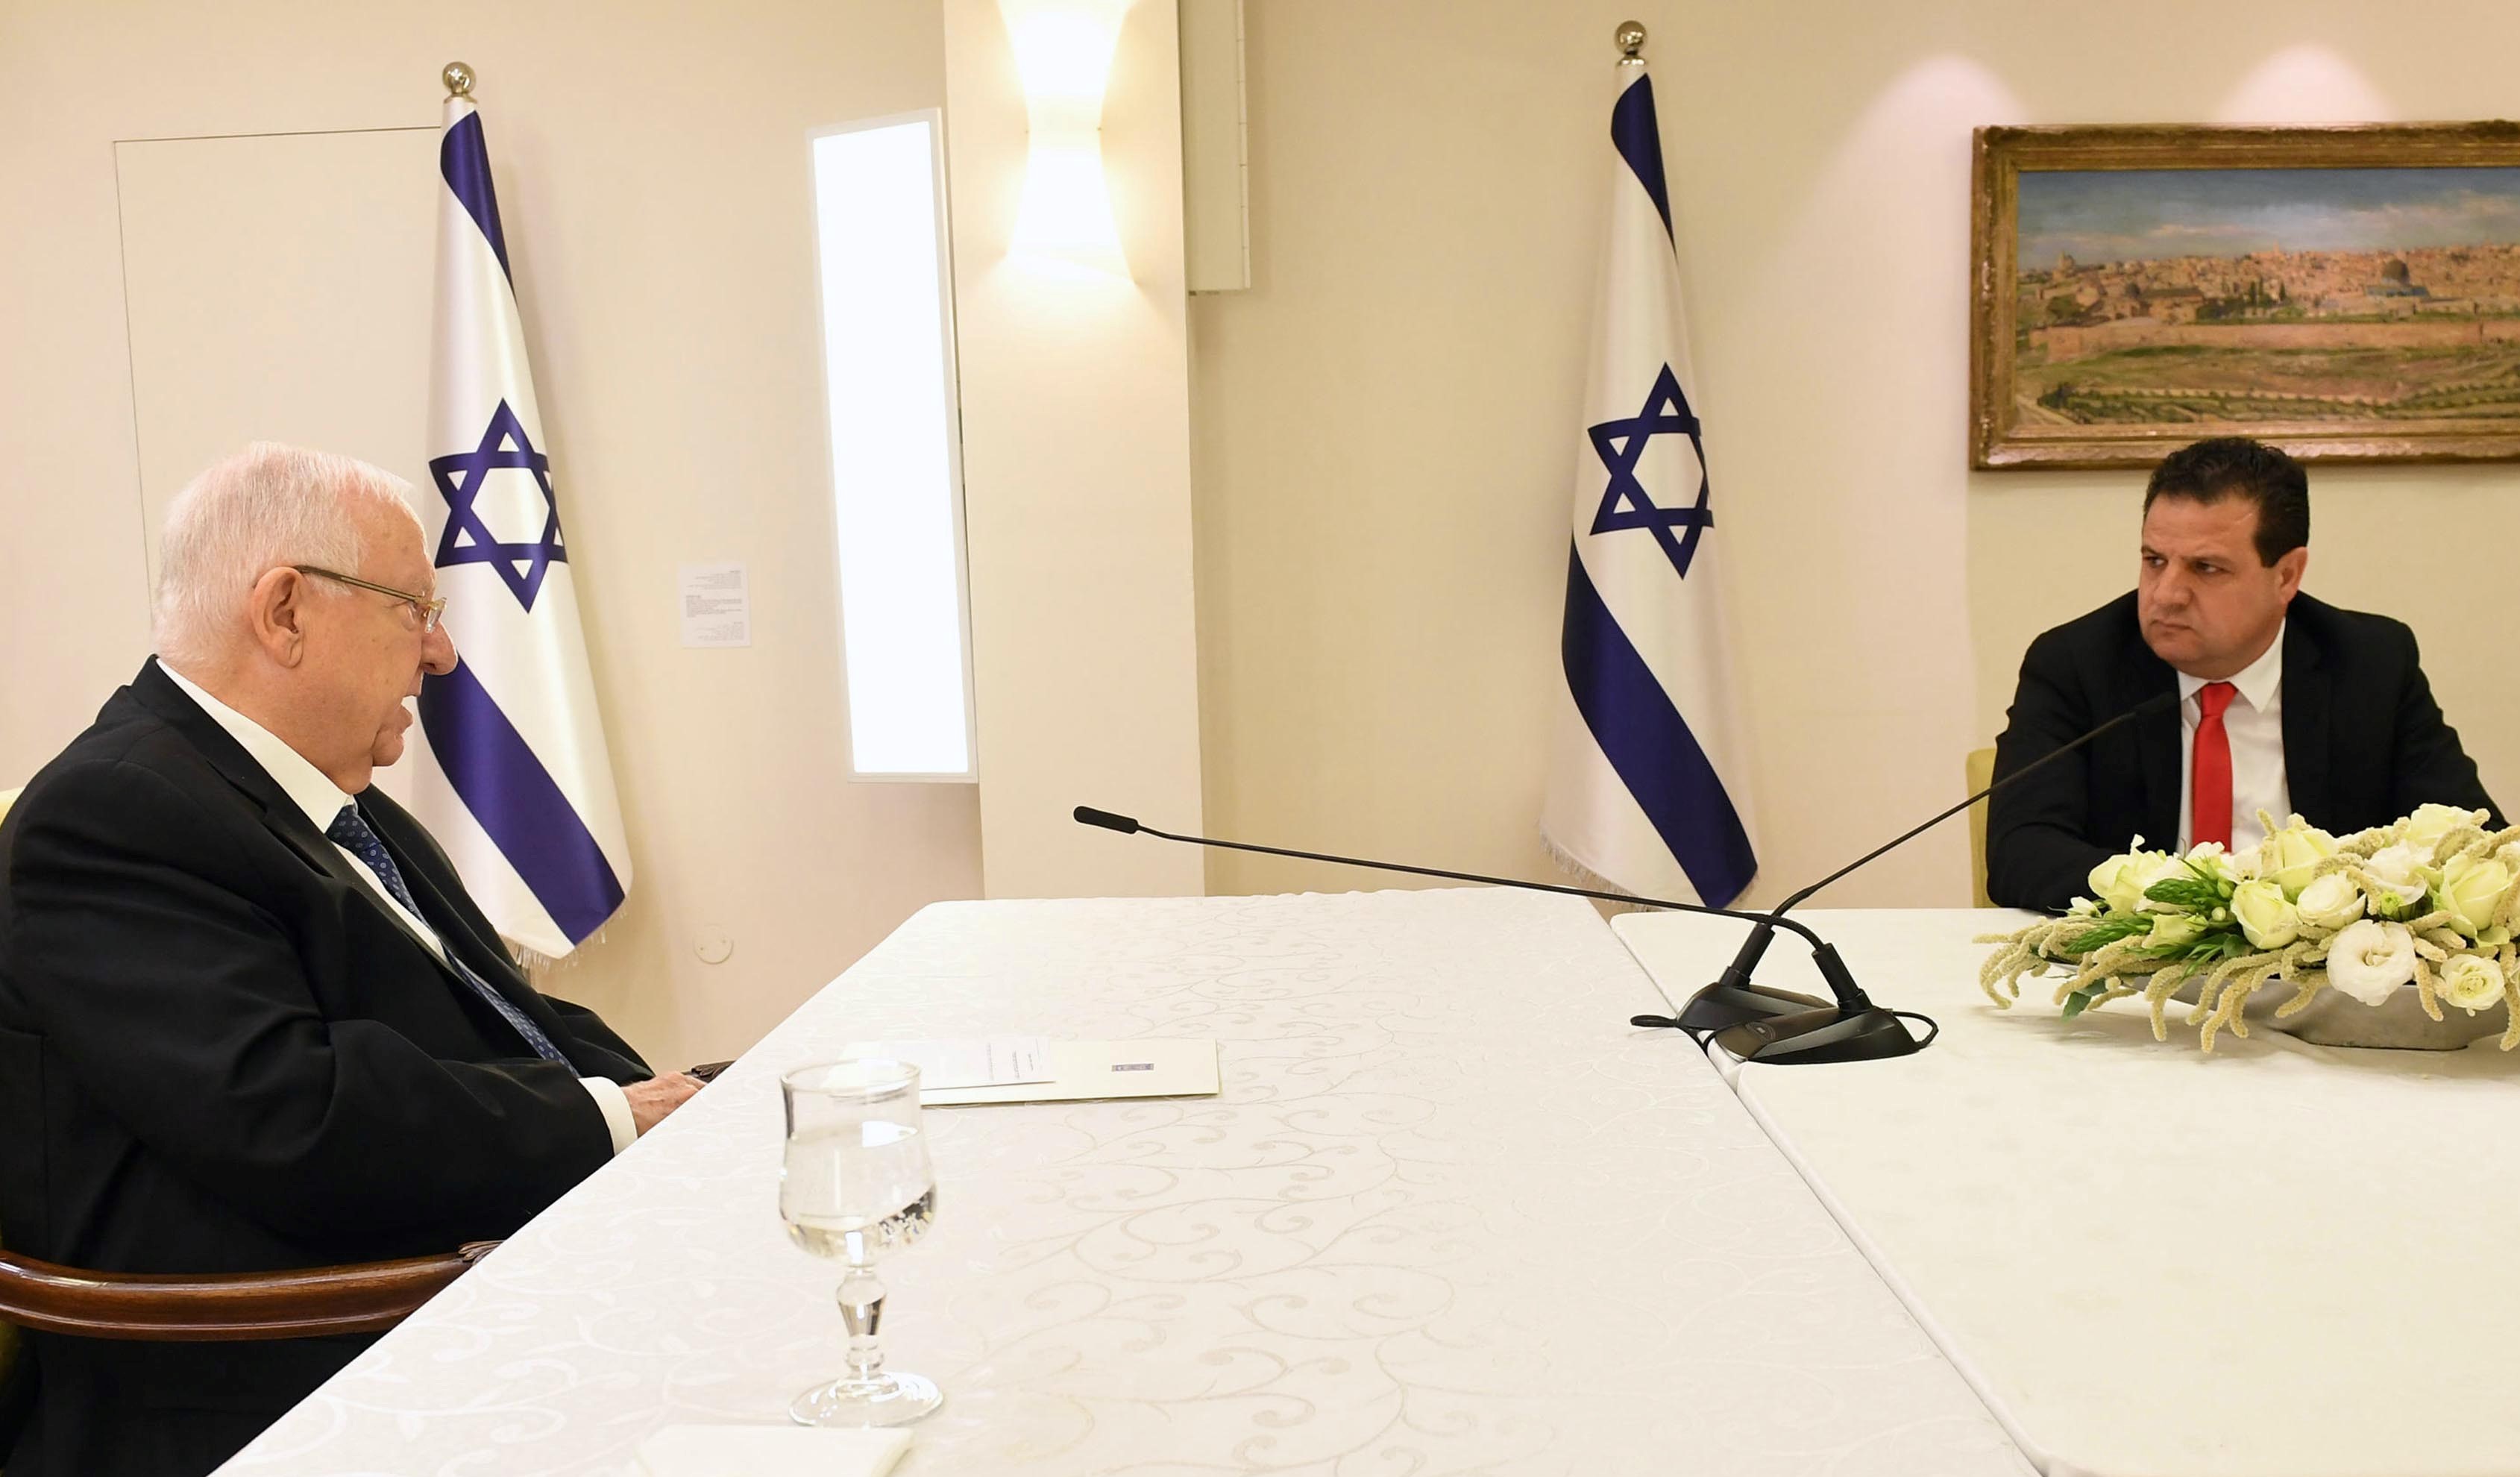 President Reuven Rivlin during his meeting with MK Ayman Odeh and other representatives of the Joint List on Sunday, March 15, 2020